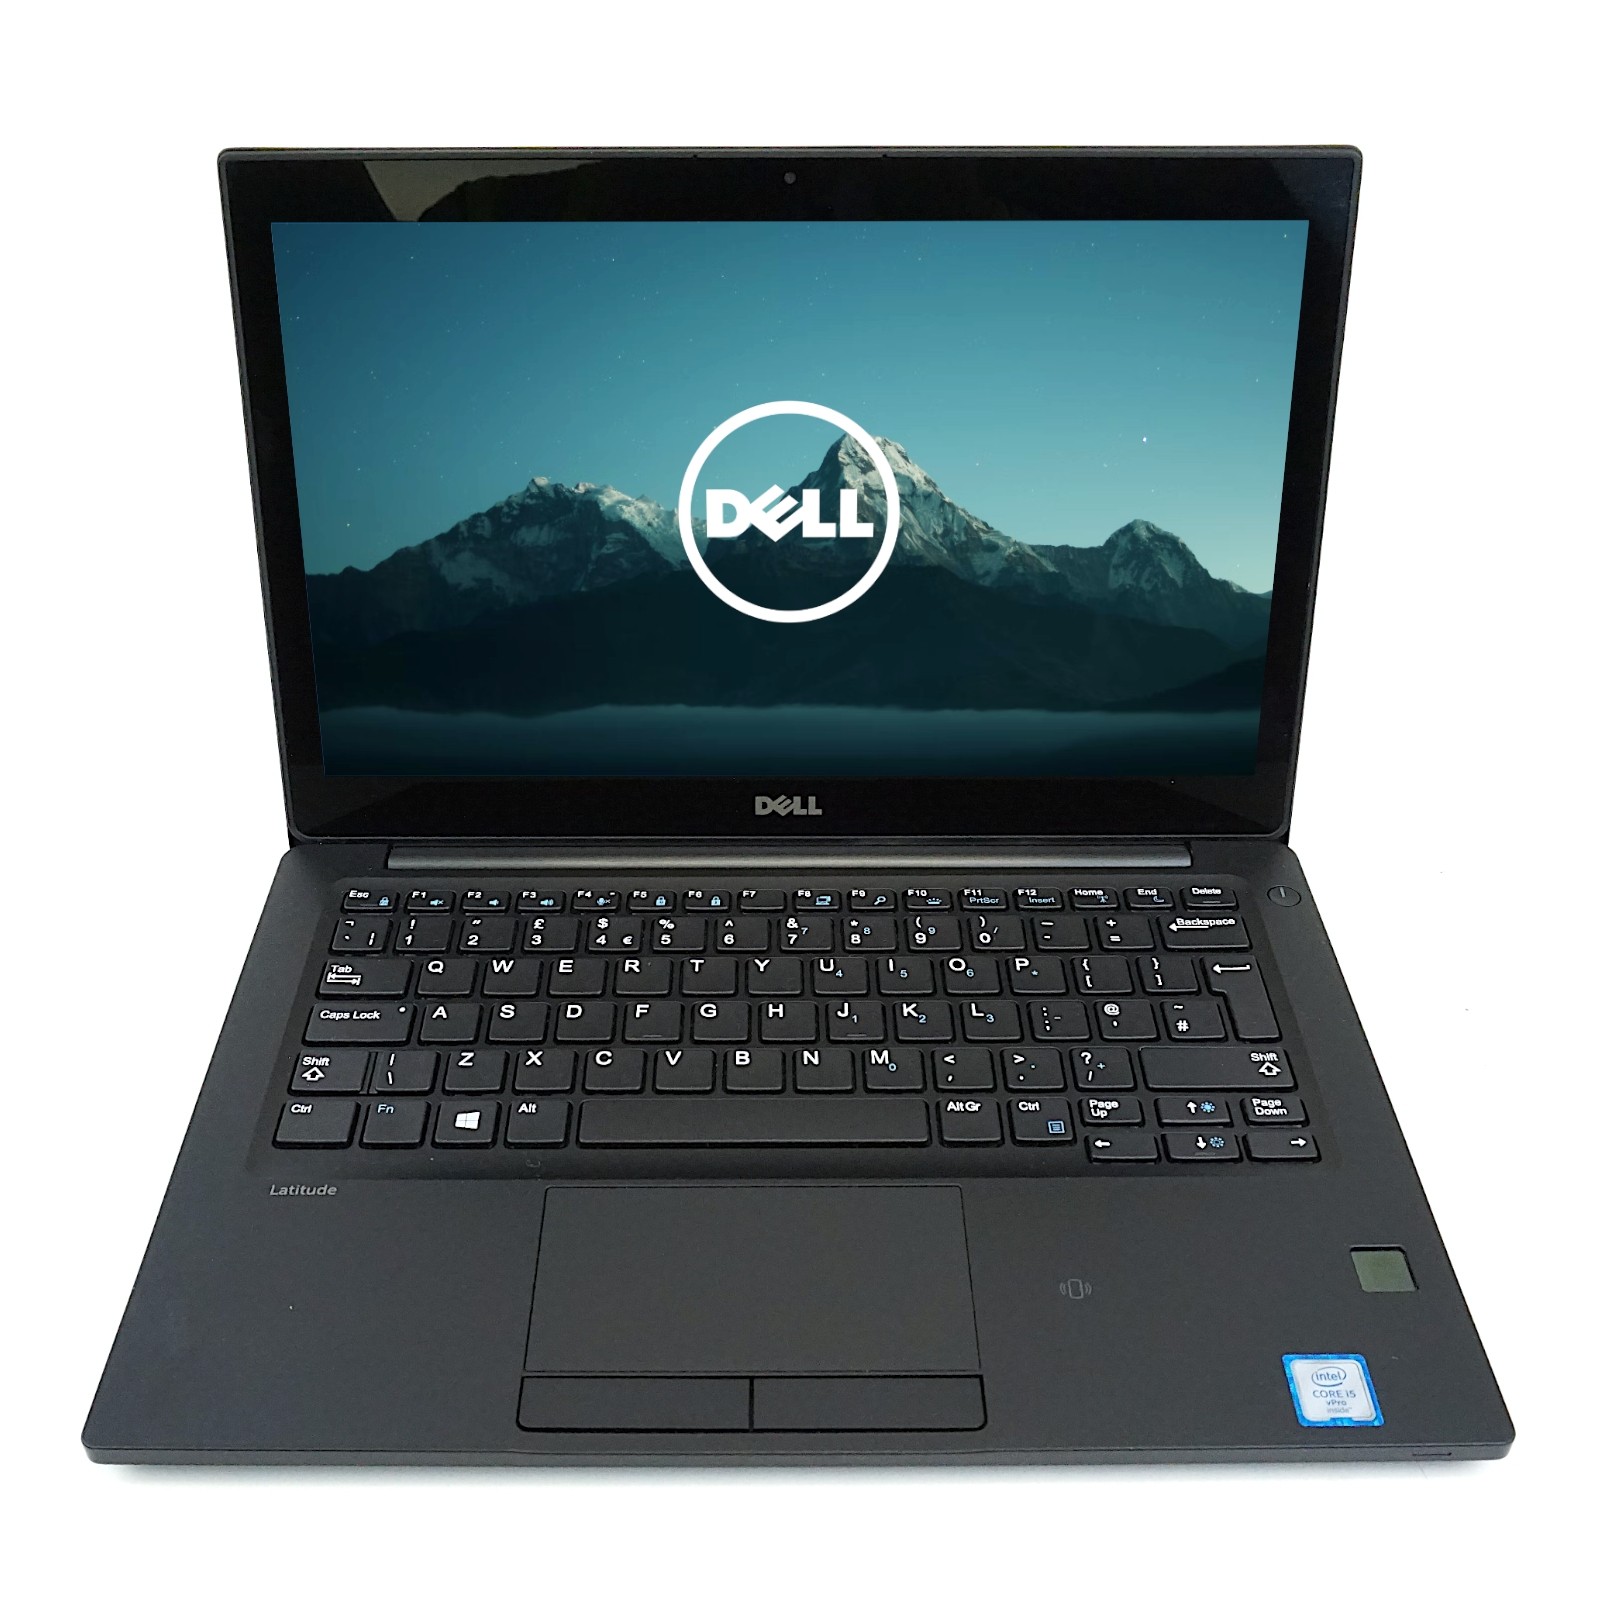 Dell Latitude 7280 12 Inch Touchscreen Laptop Front